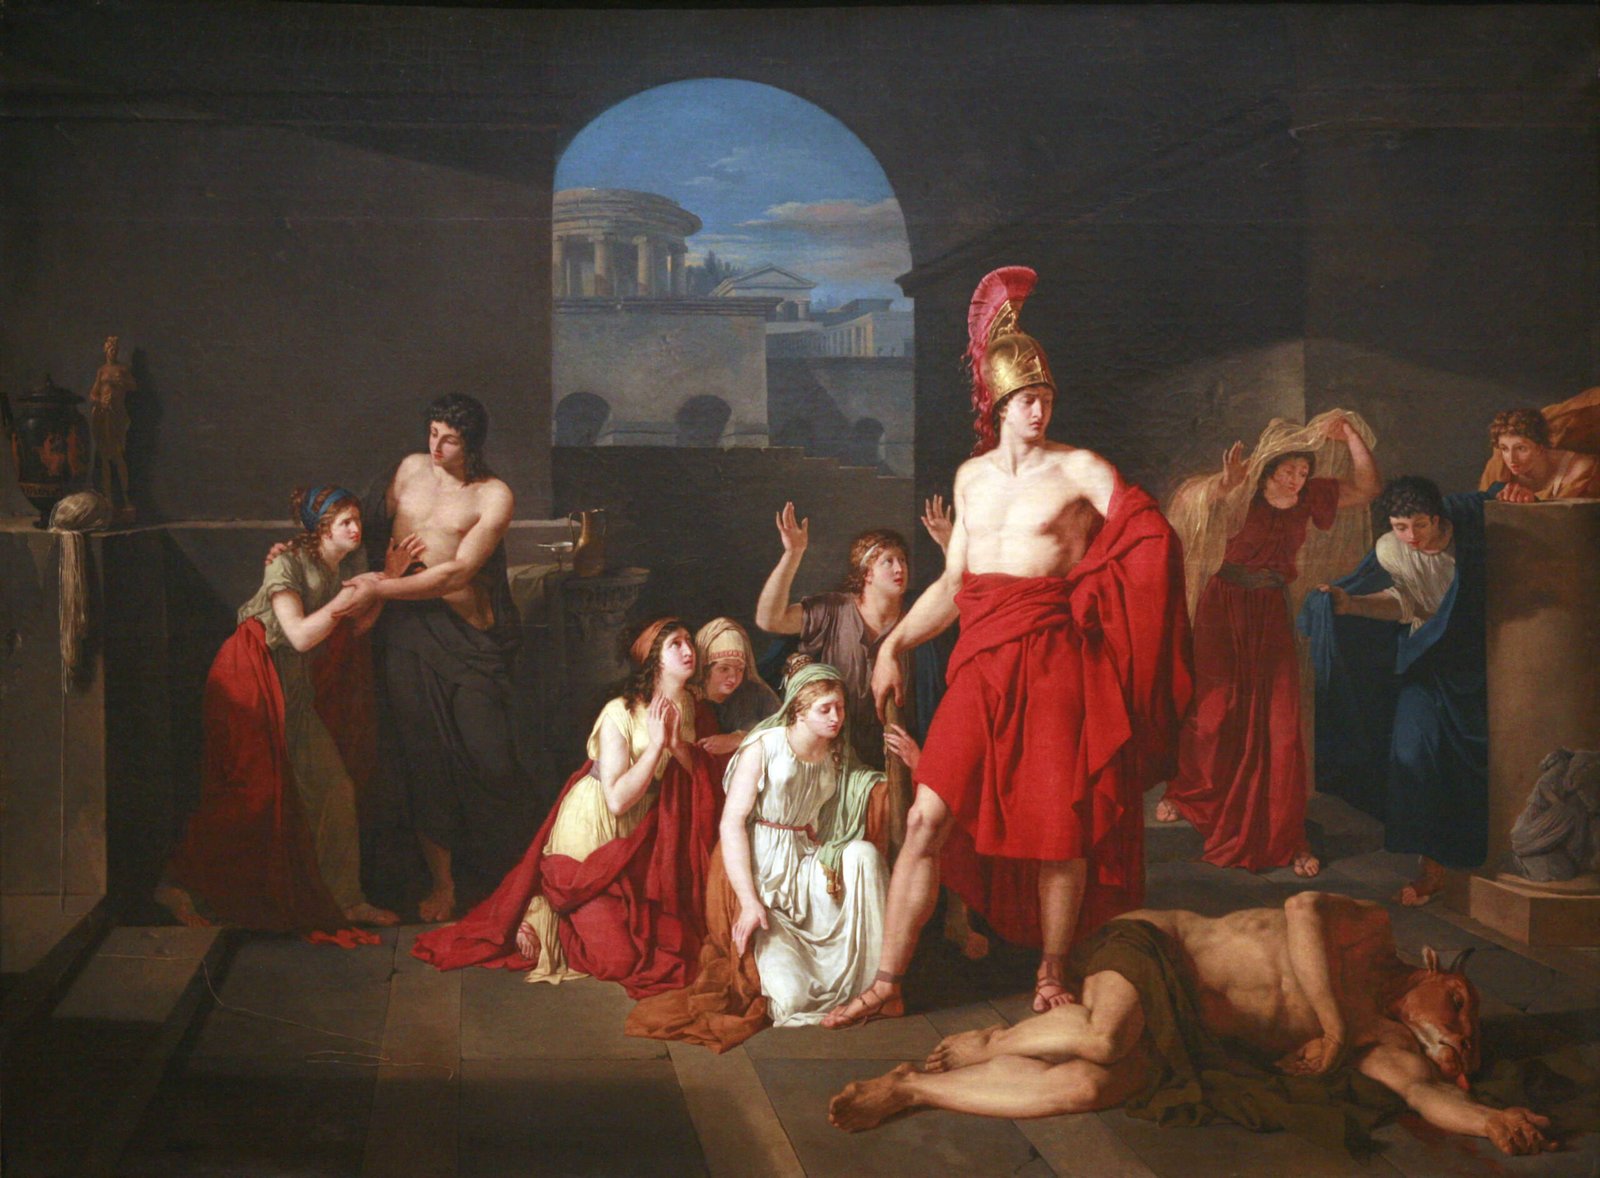 This painting represents one of the greatest Greek heroes, named Theseus. He is dressed in scarlet robes and surrounded by women. The corpse of the Minotaur lies near his feet.